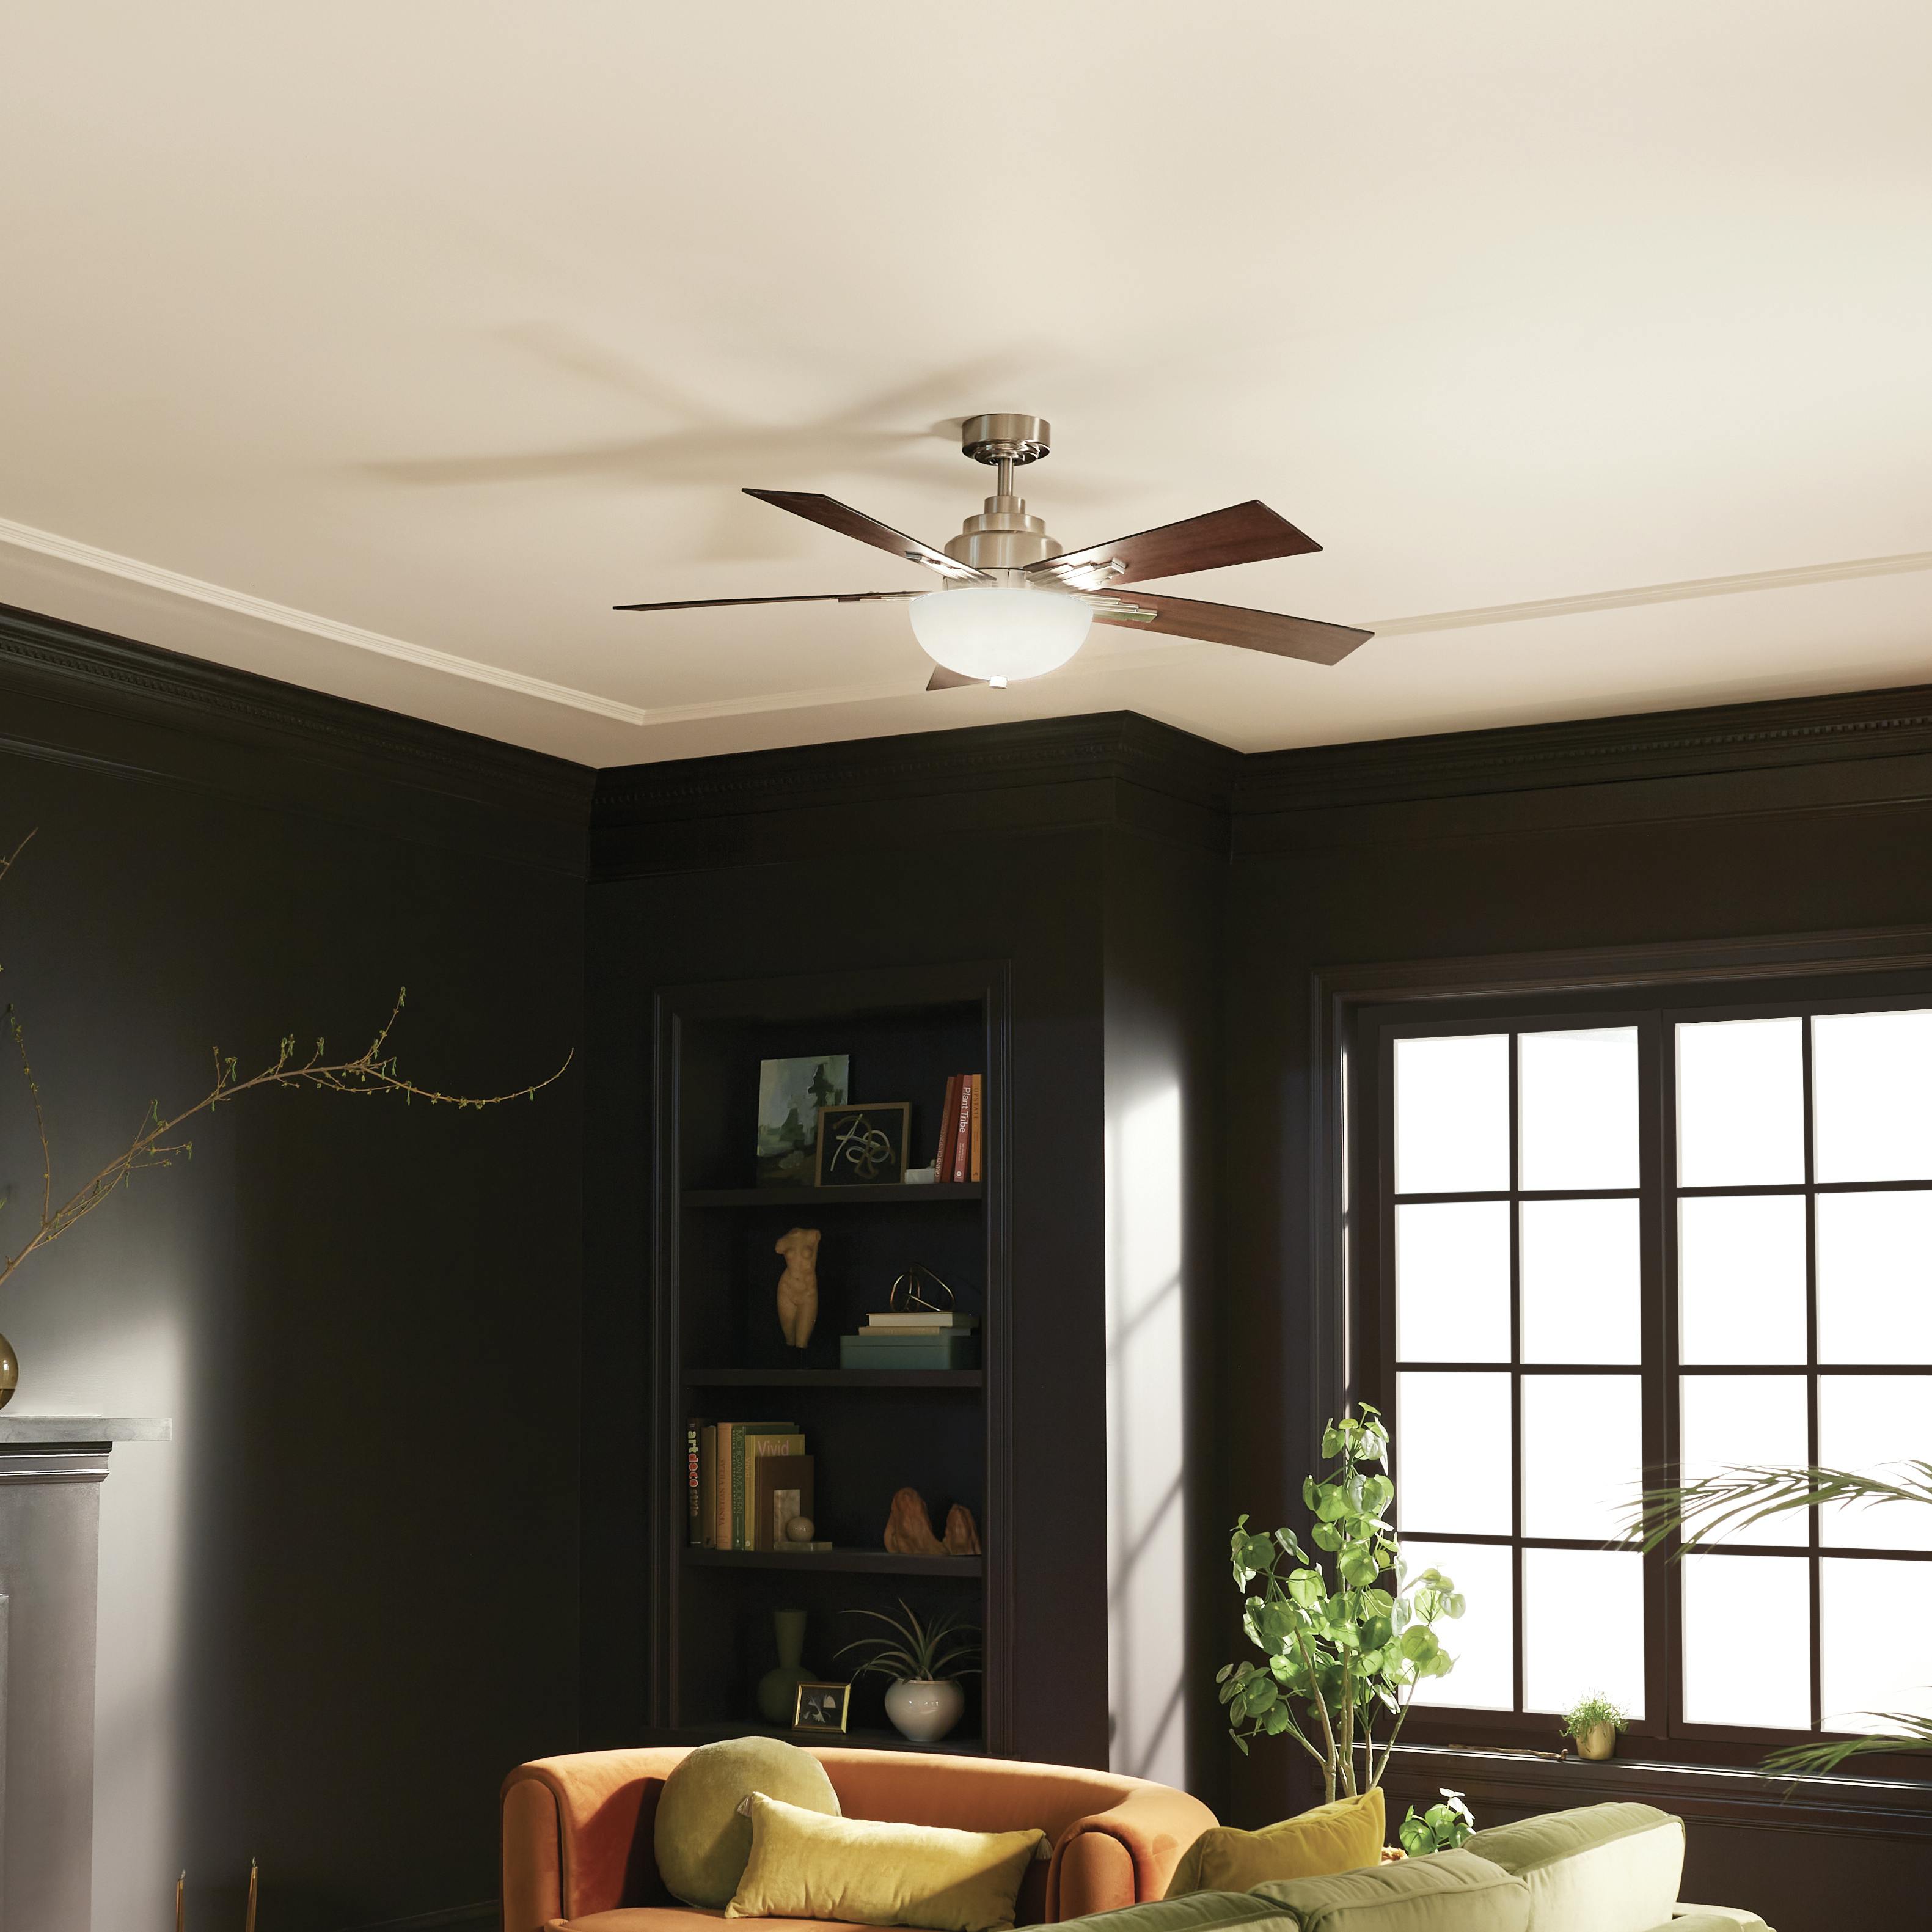 Day time living room with 52" Vinea 5 Blade LED Indoor Ceiling Fan Brushed Stainless Steel